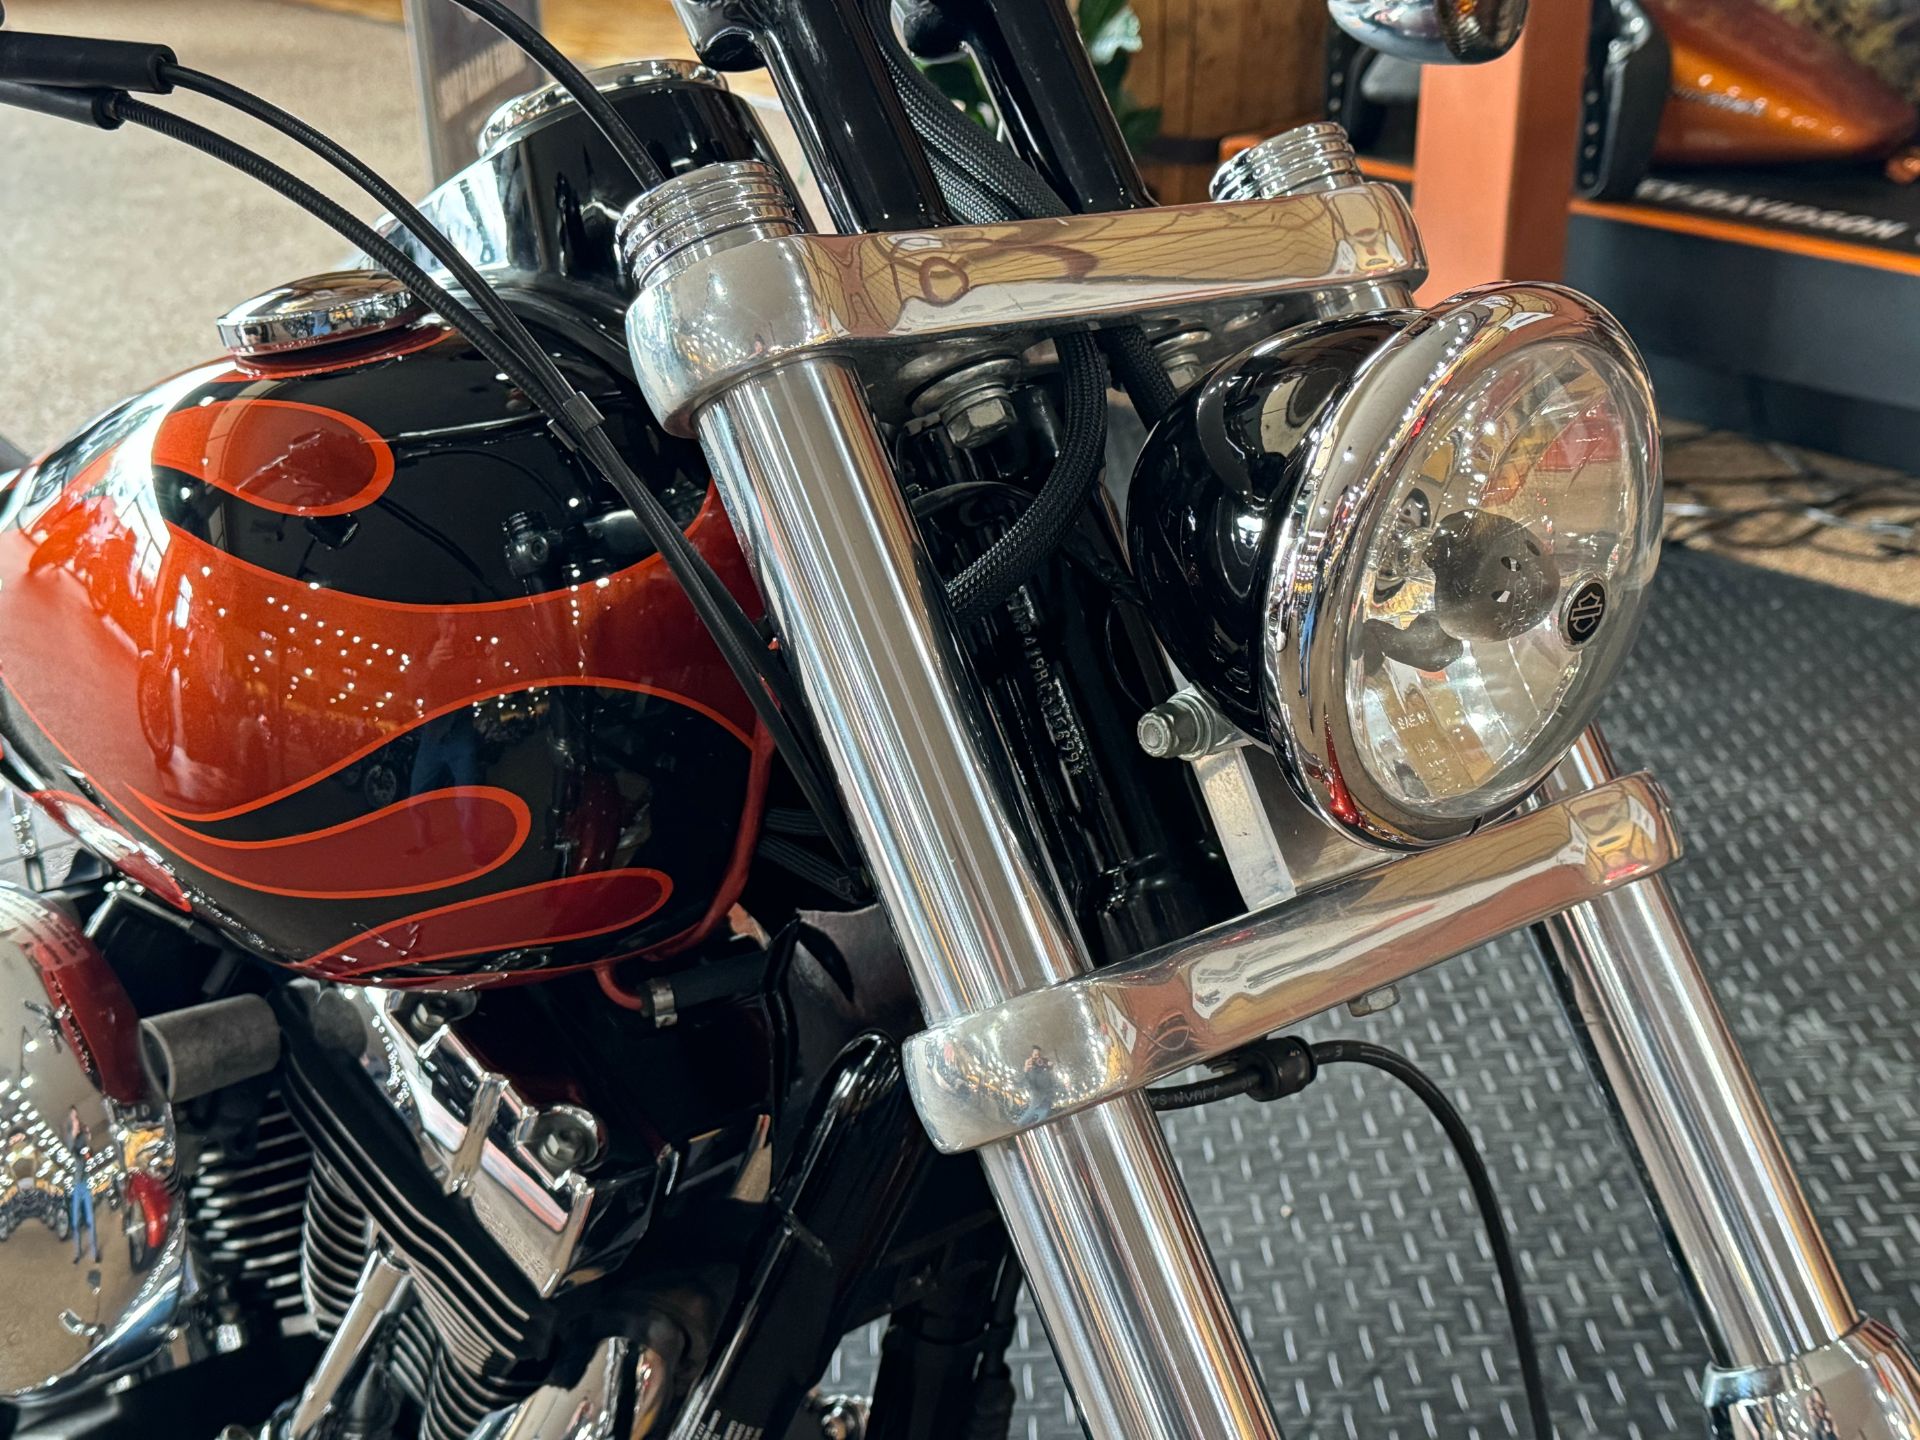 2011 Harley-Davidson Dyna® Wide Glide® in Knoxville, Tennessee - Photo 3